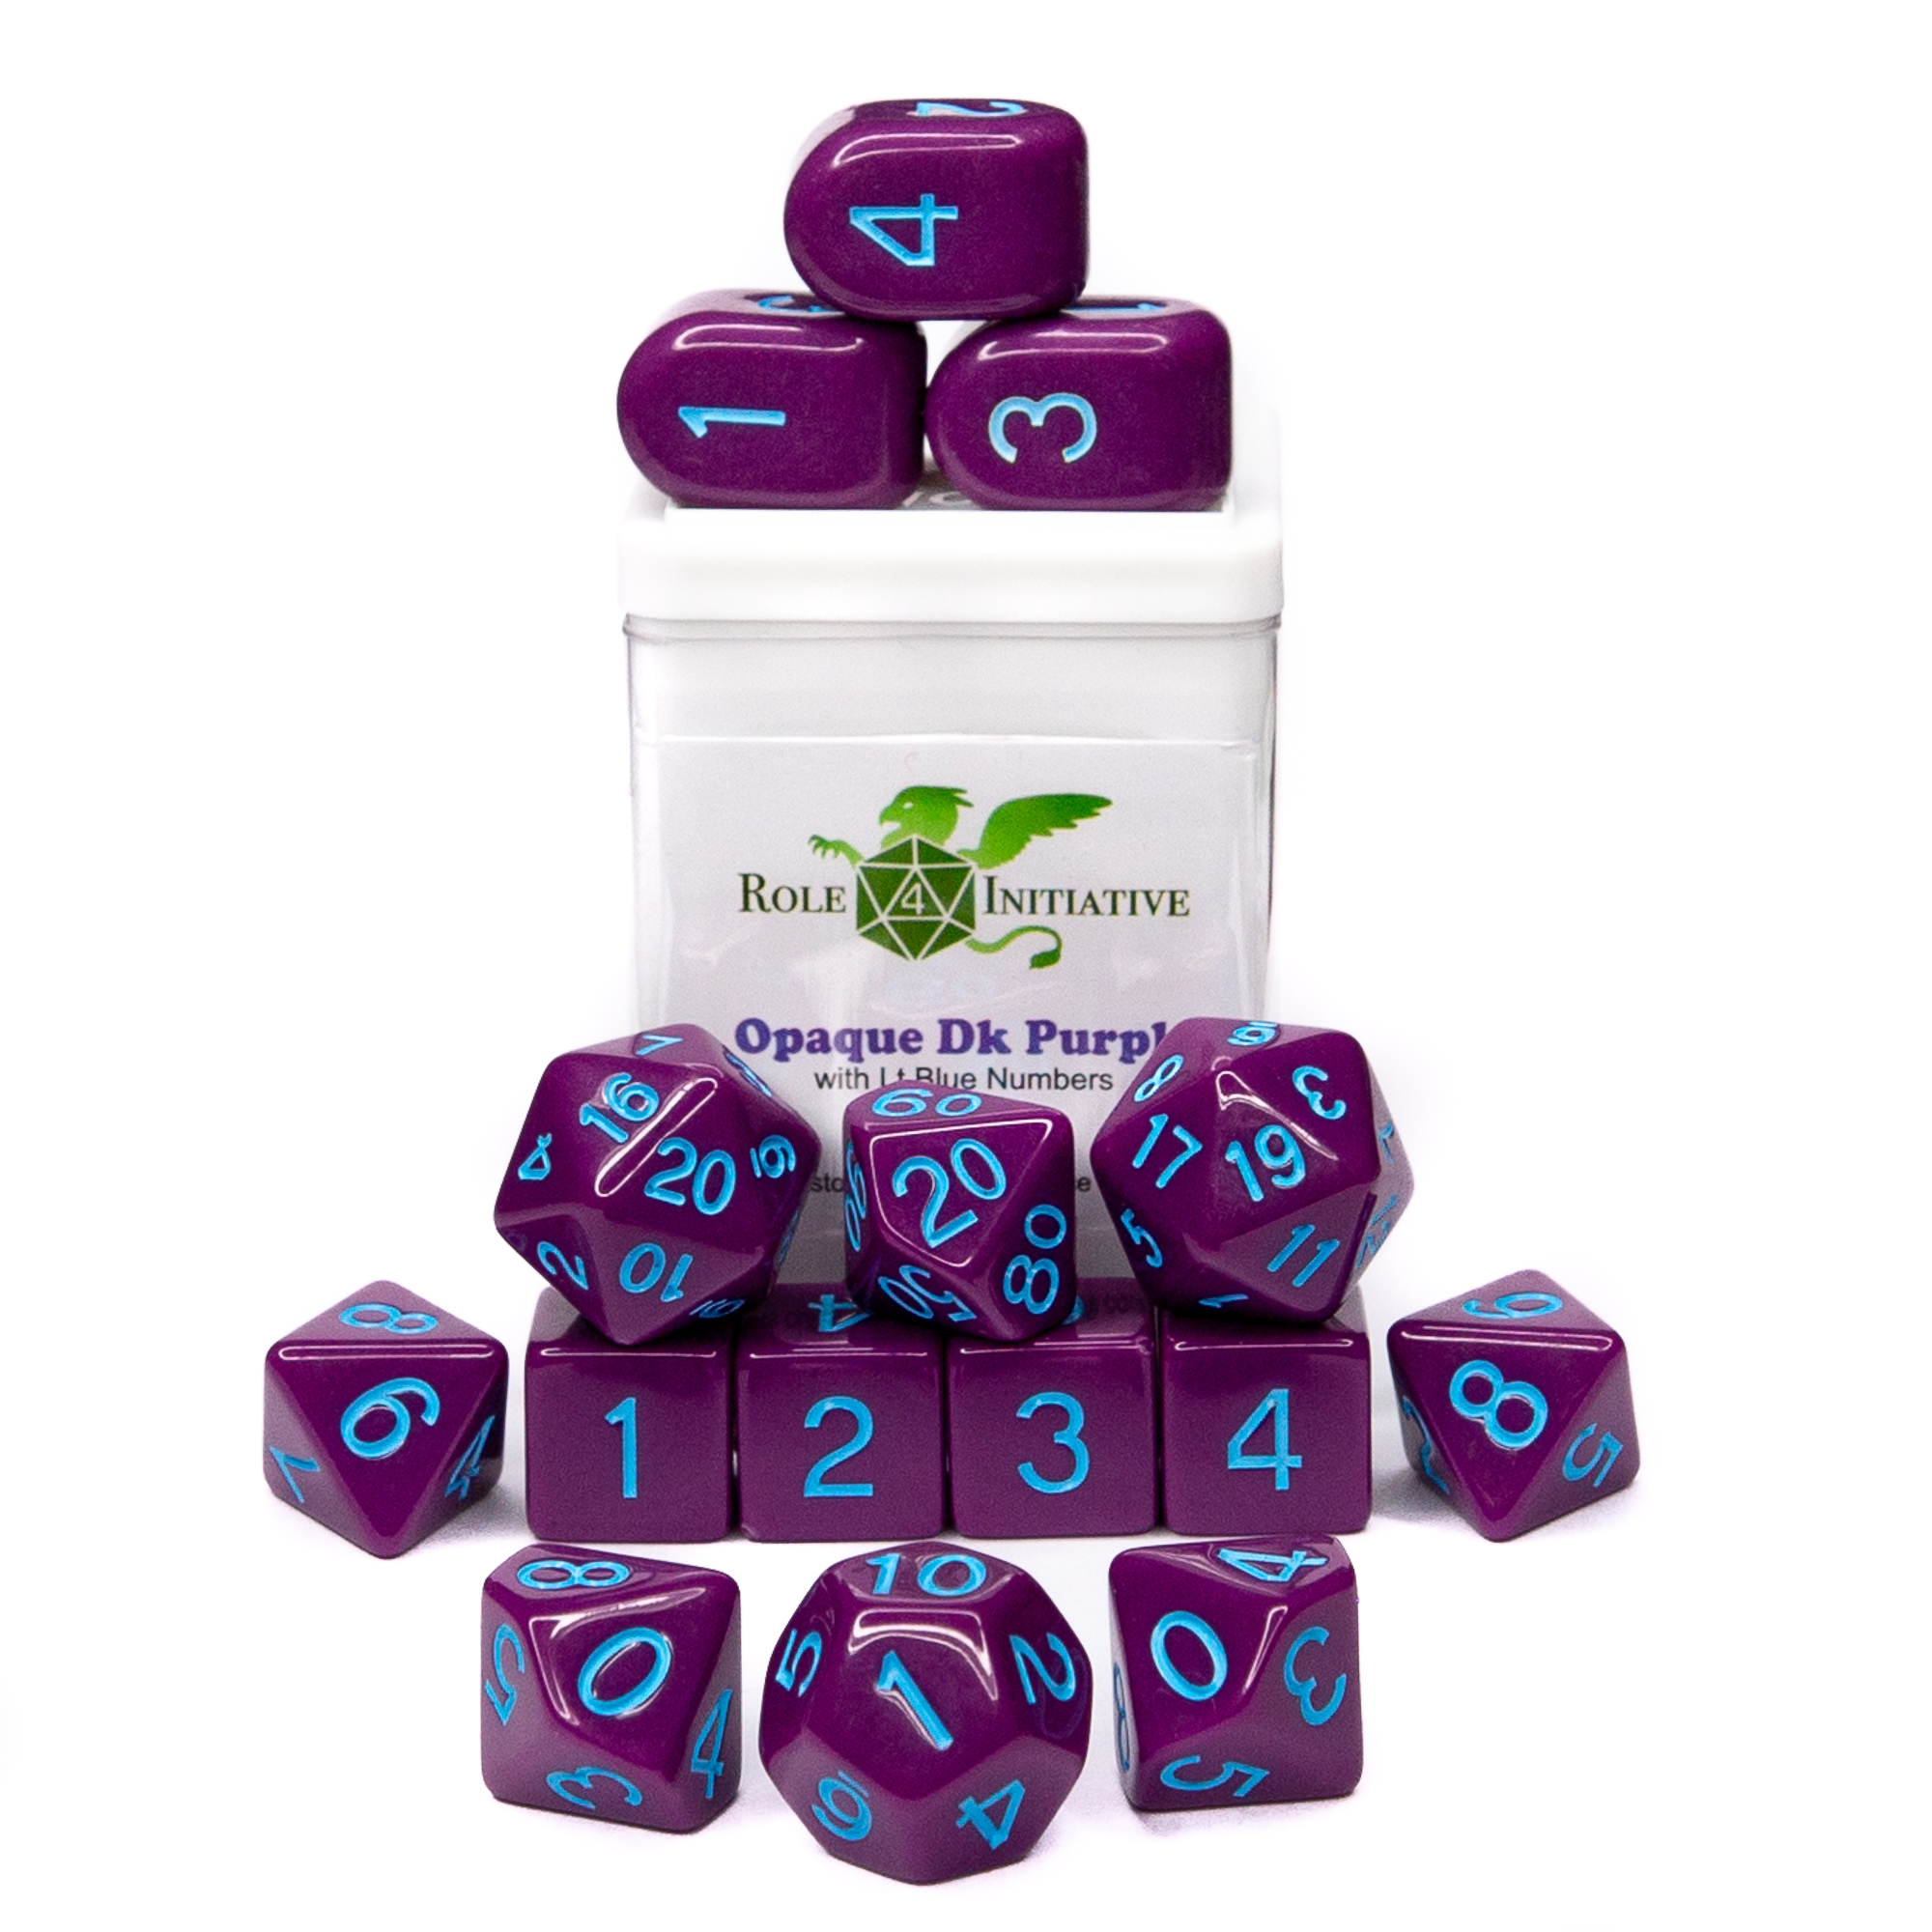 Role 4 Initiative: Polyhedral 15 Dice Set: Opaque Dark Purple And Light Blue Arch D4 